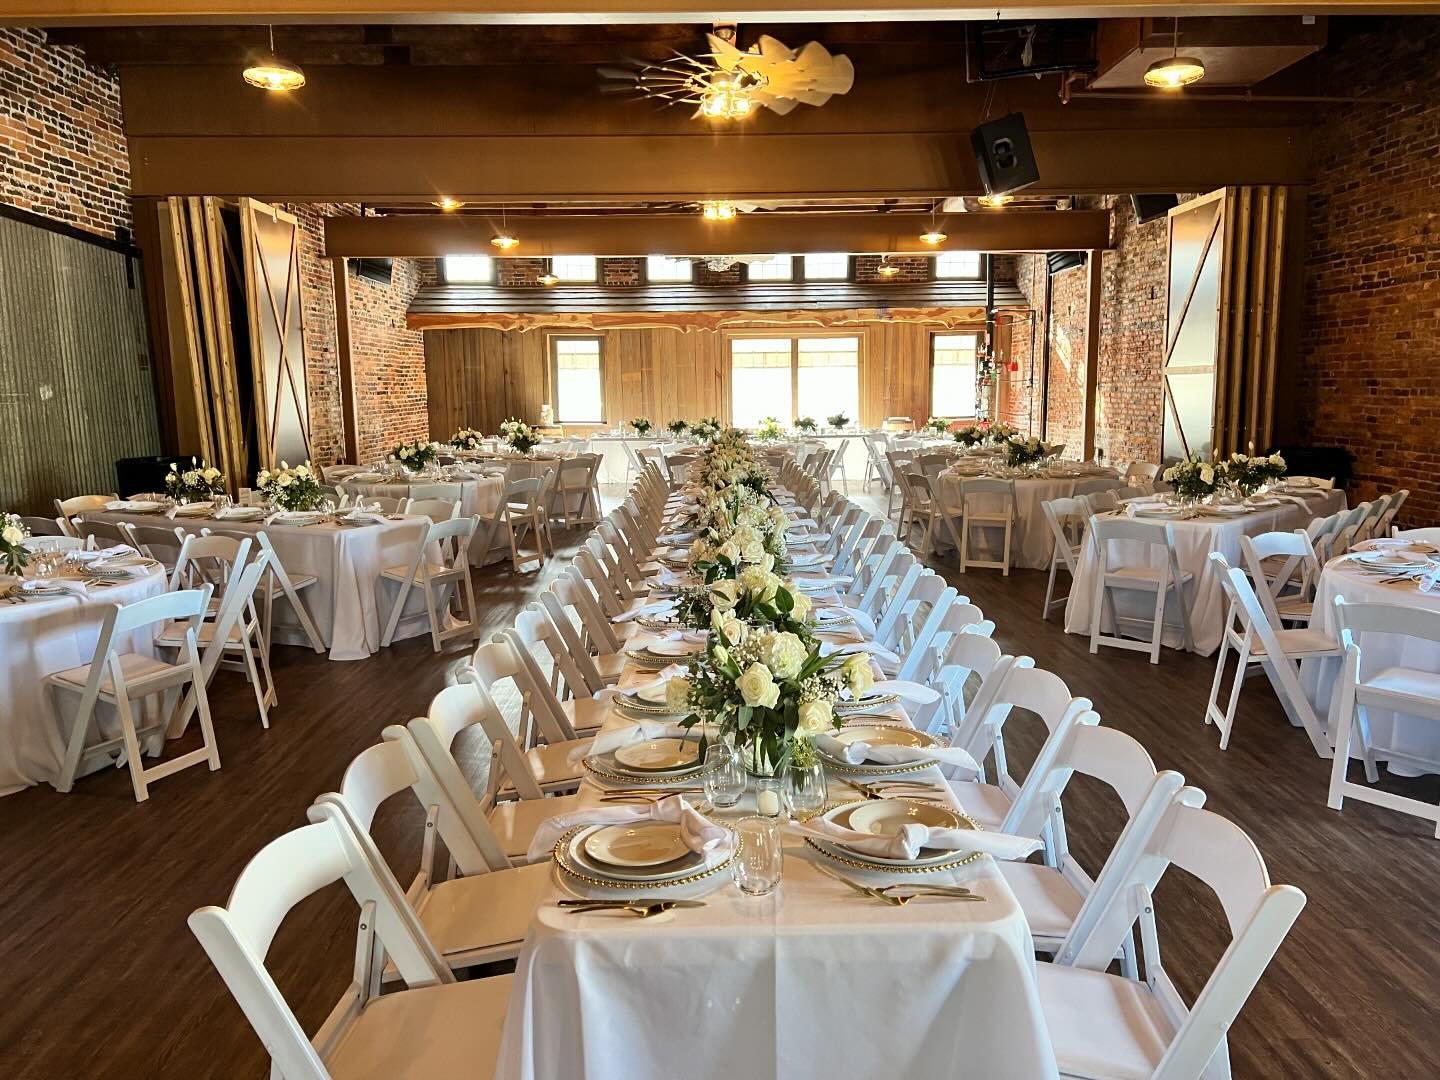 Celebrating love surrounded by elegance and enchantment in our stunning wedding reception venue. ✨🤍👰🏻&zwj;♀️🤵🏻&zwj;♂️

#loveinbloom #enchanting #weddingreception #venue #weddingreceptionvenue #arkansasvenue #hotspringsvenue #distillery #happilye